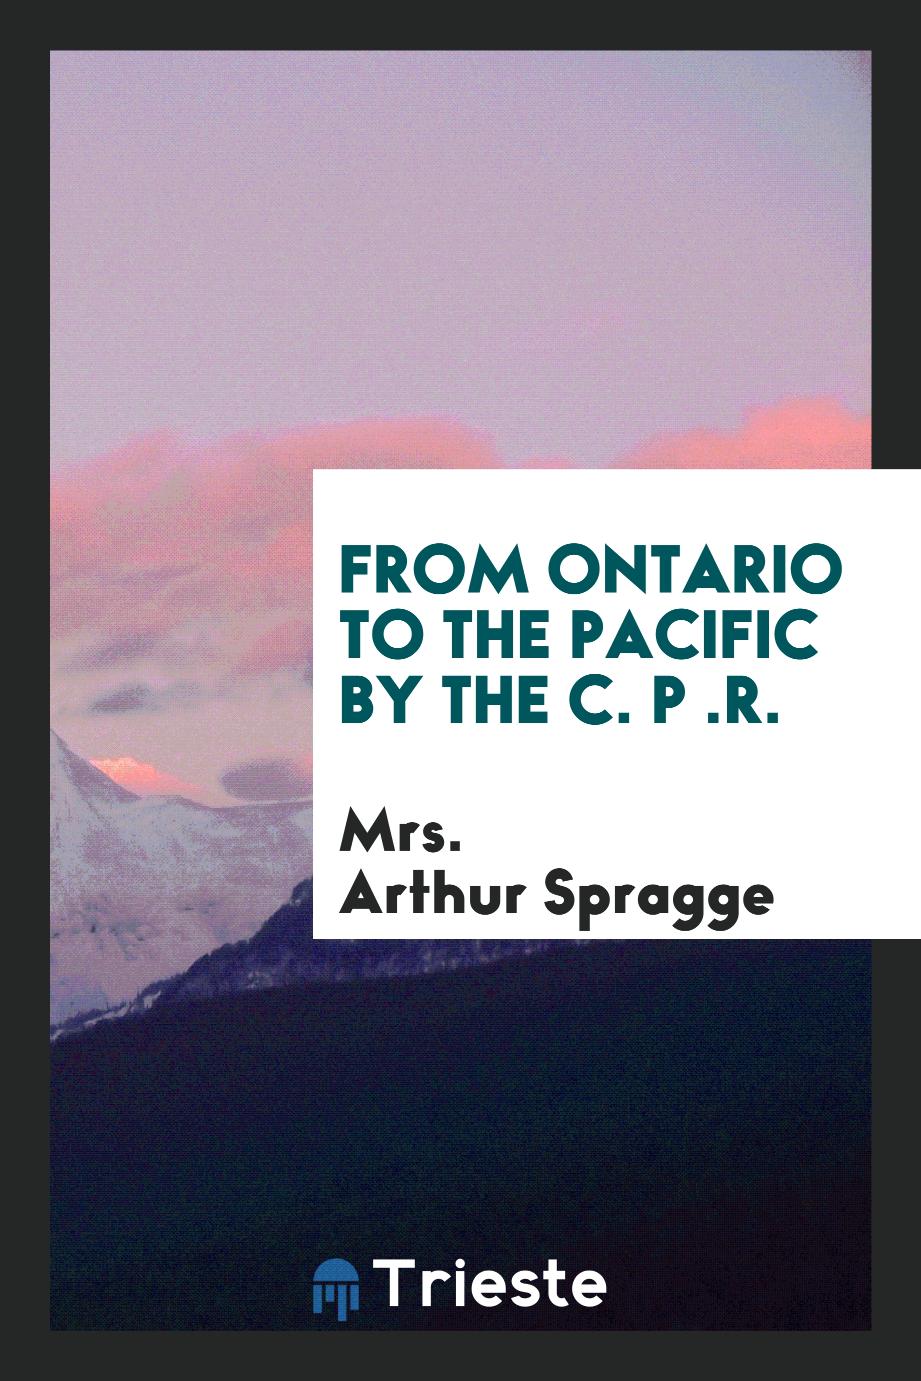 From Ontario to the Pacific by the C. P .R.